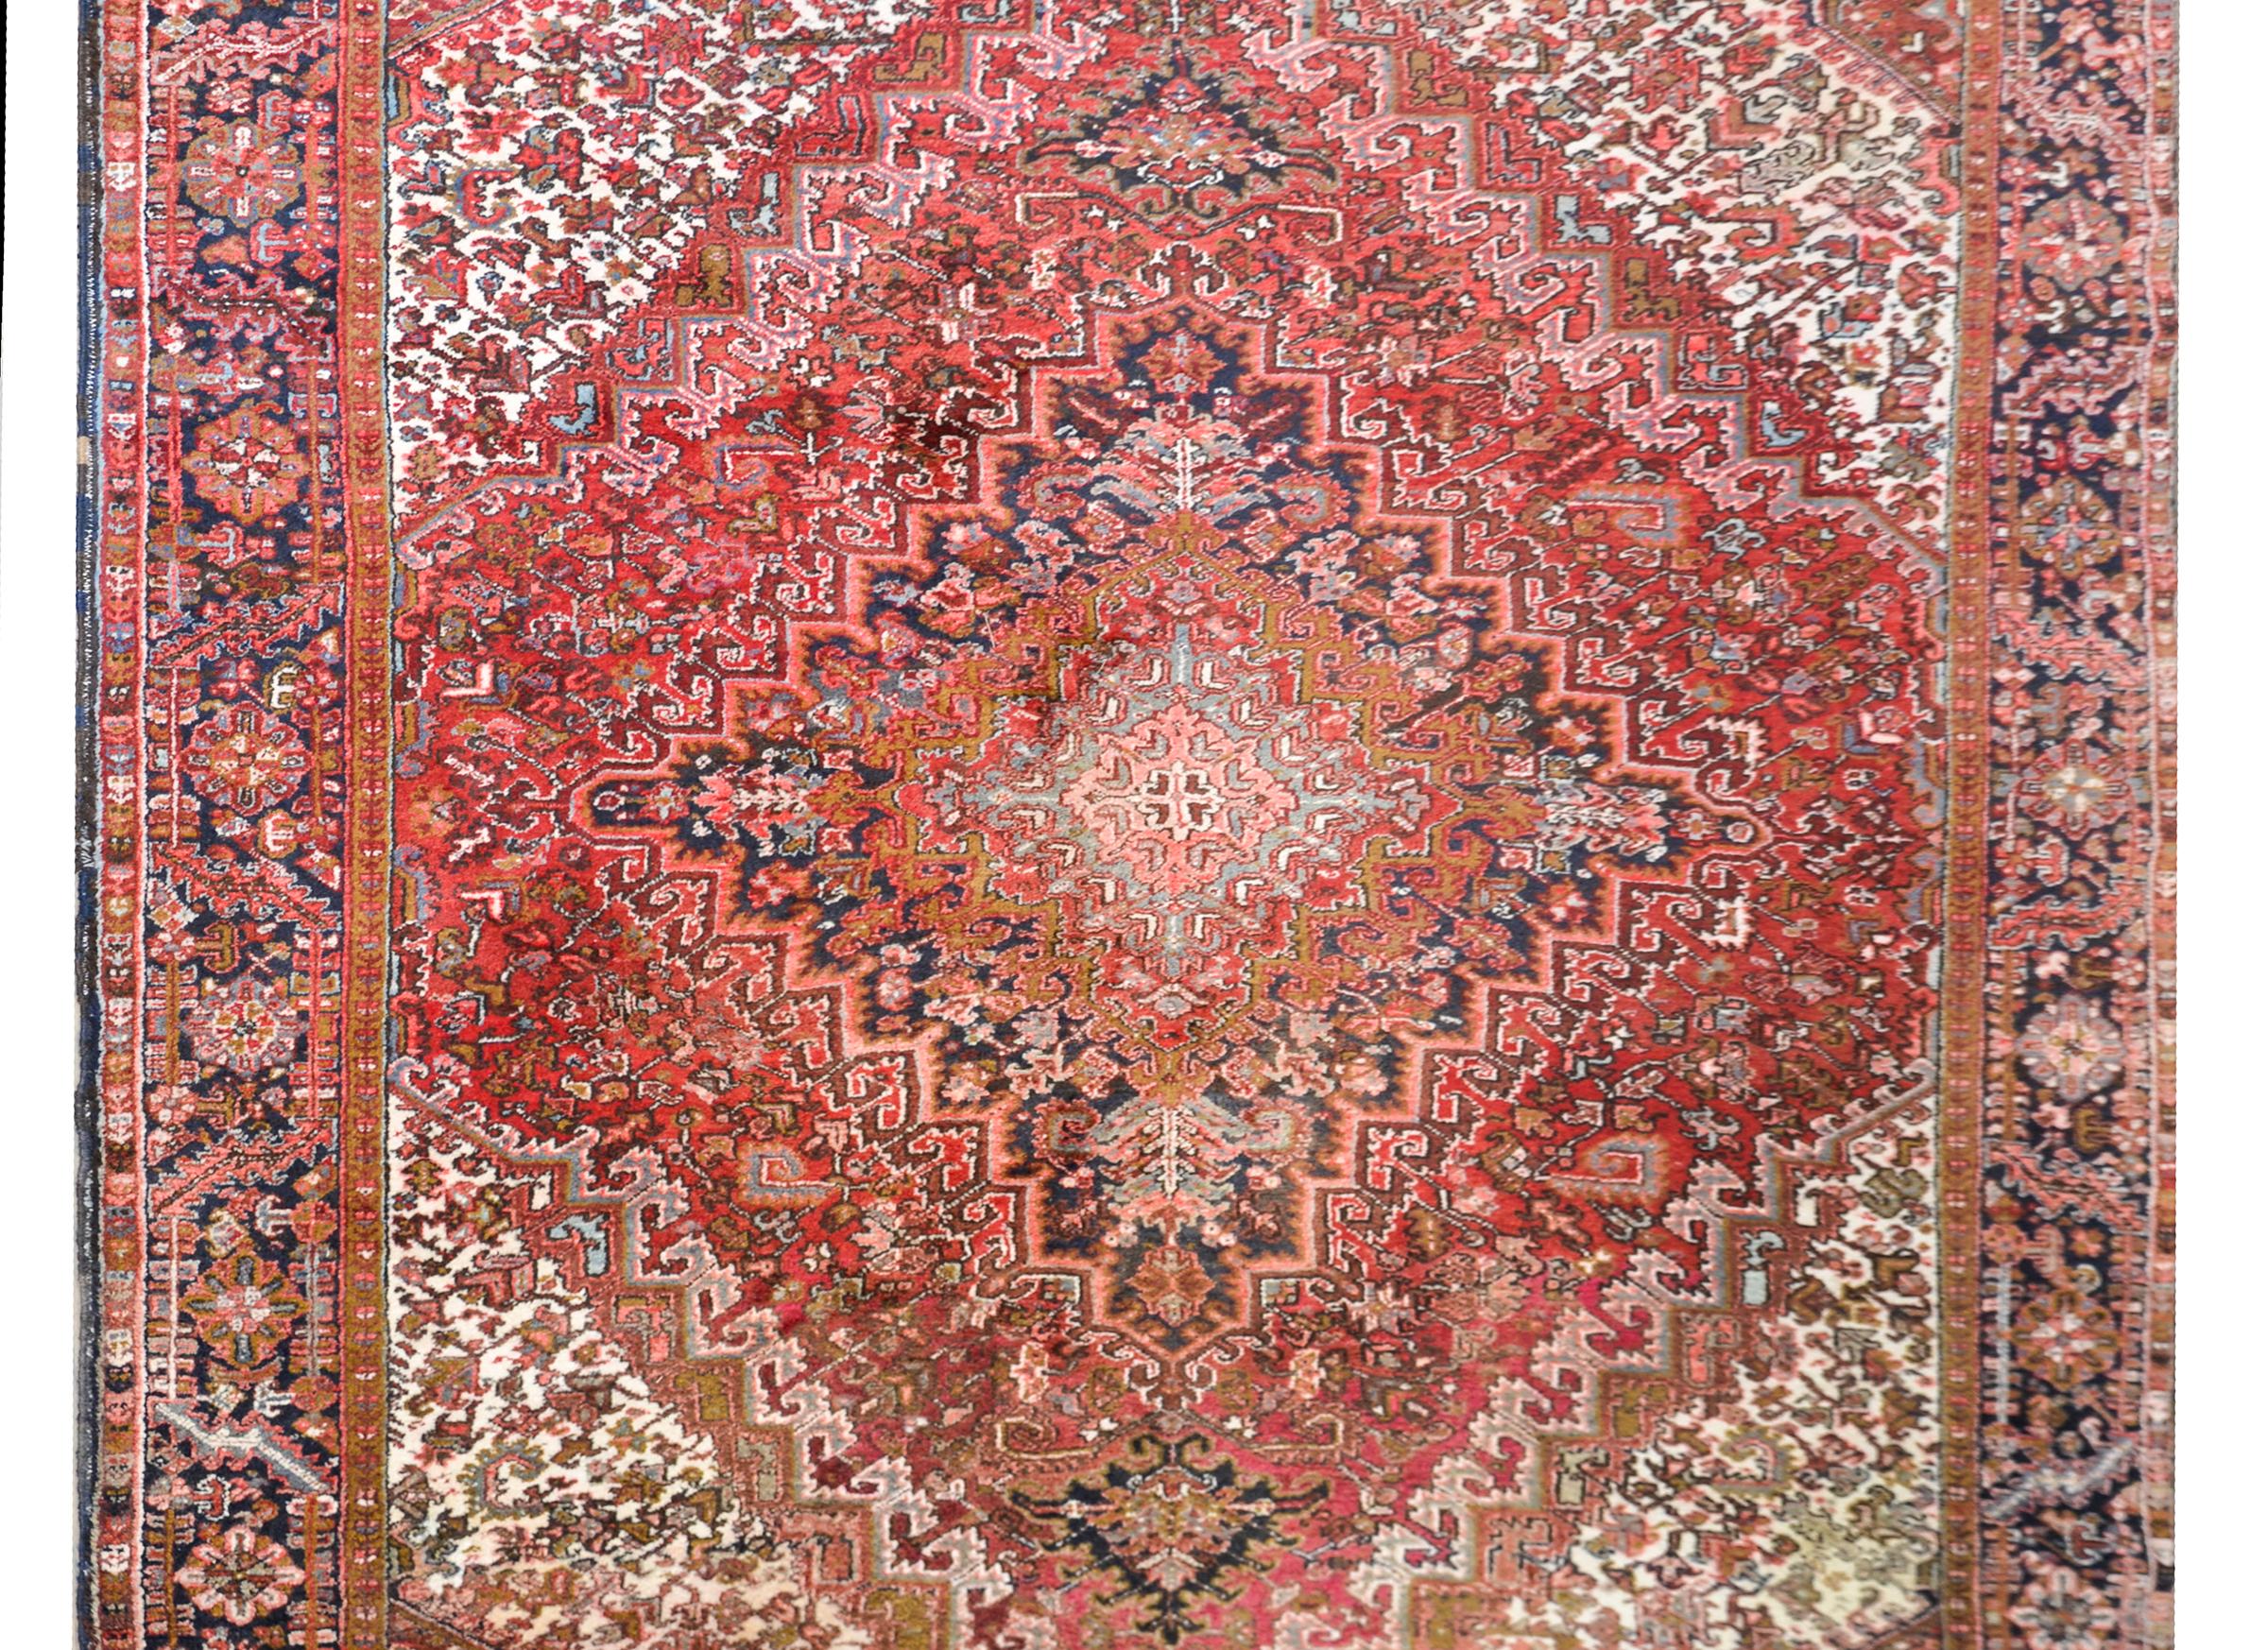 A wonderful bold late 20th century Persian Heriz rug with an incredible diamond medallion radiating with myriad floral patterns woven in wonderful crimsons, creams, pinks, violets, and oranges, and surrounded by a wide large-scale floral patterned